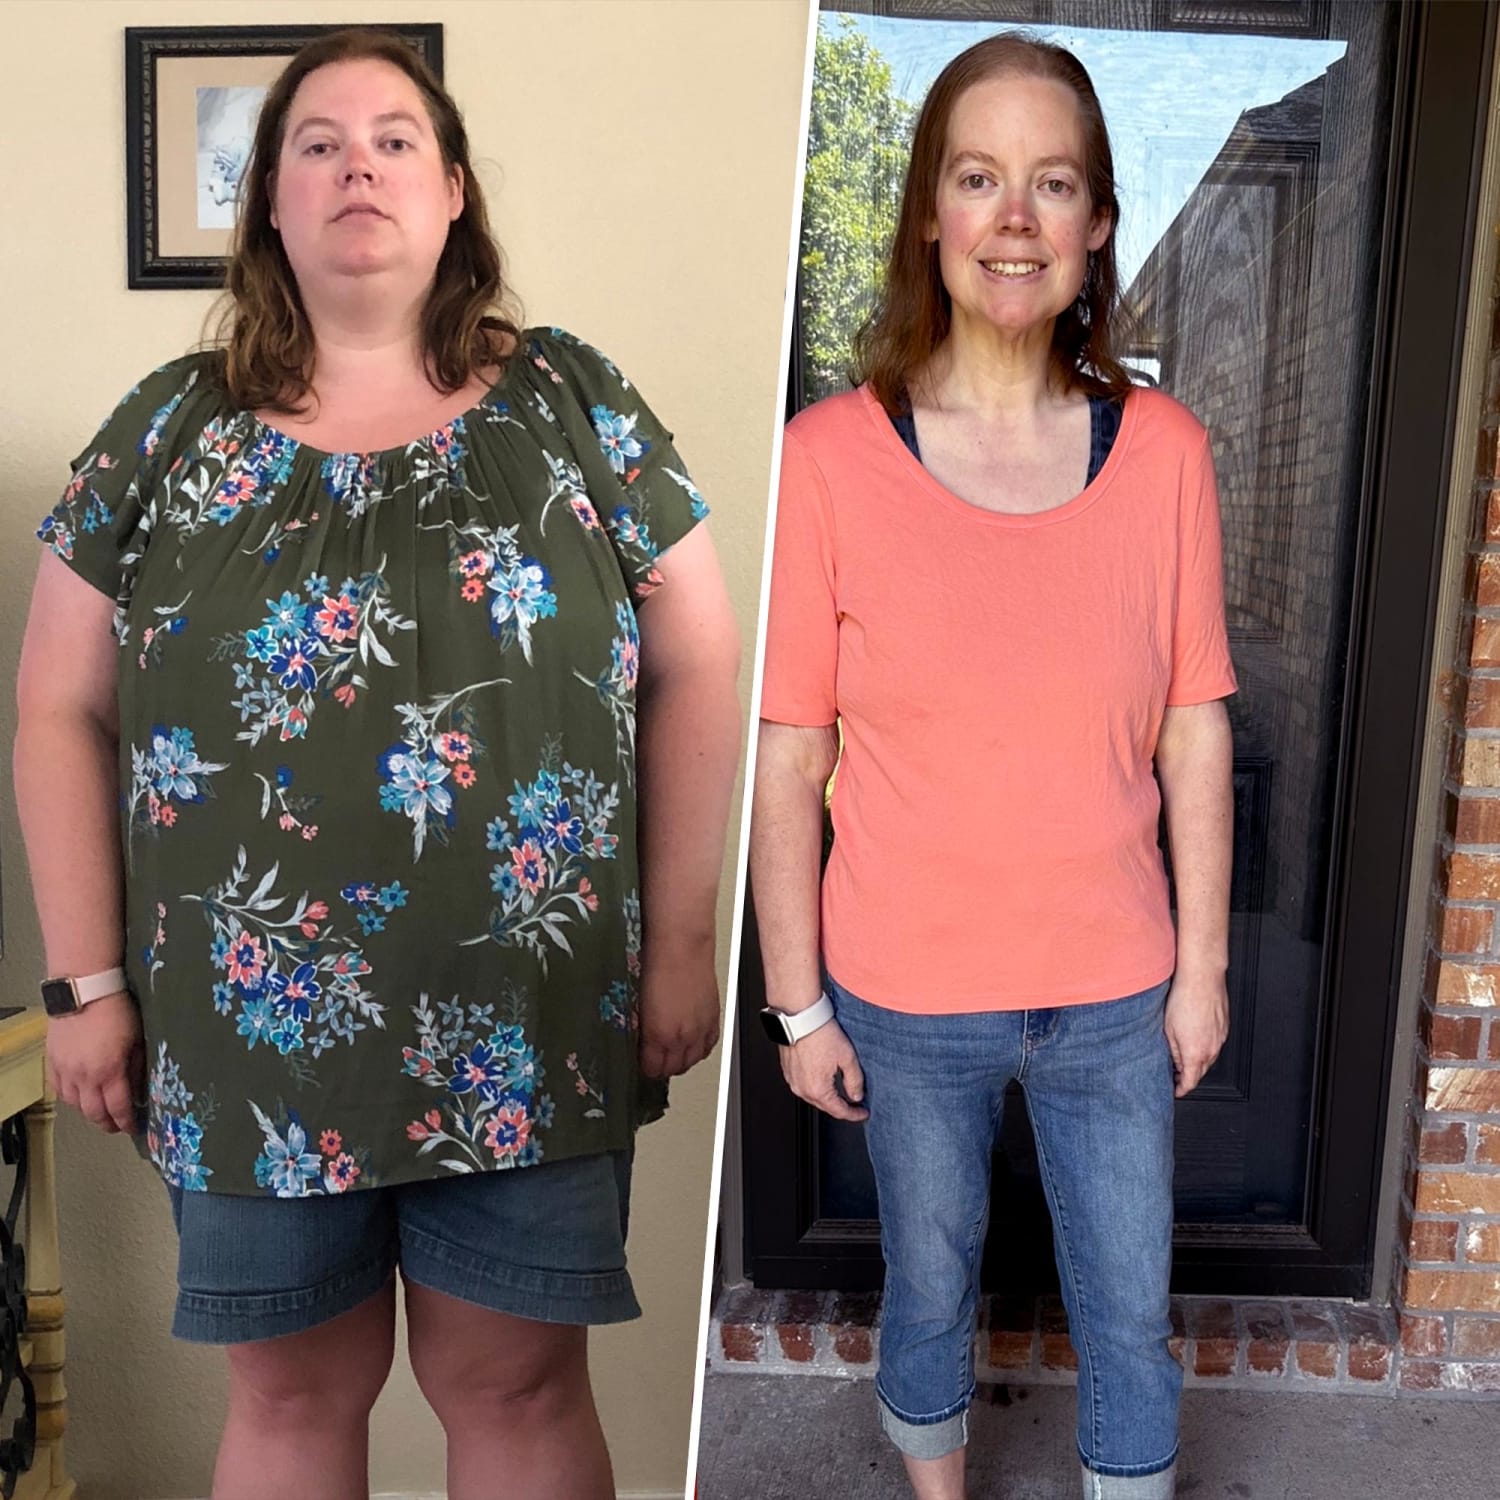 Weight control success stories